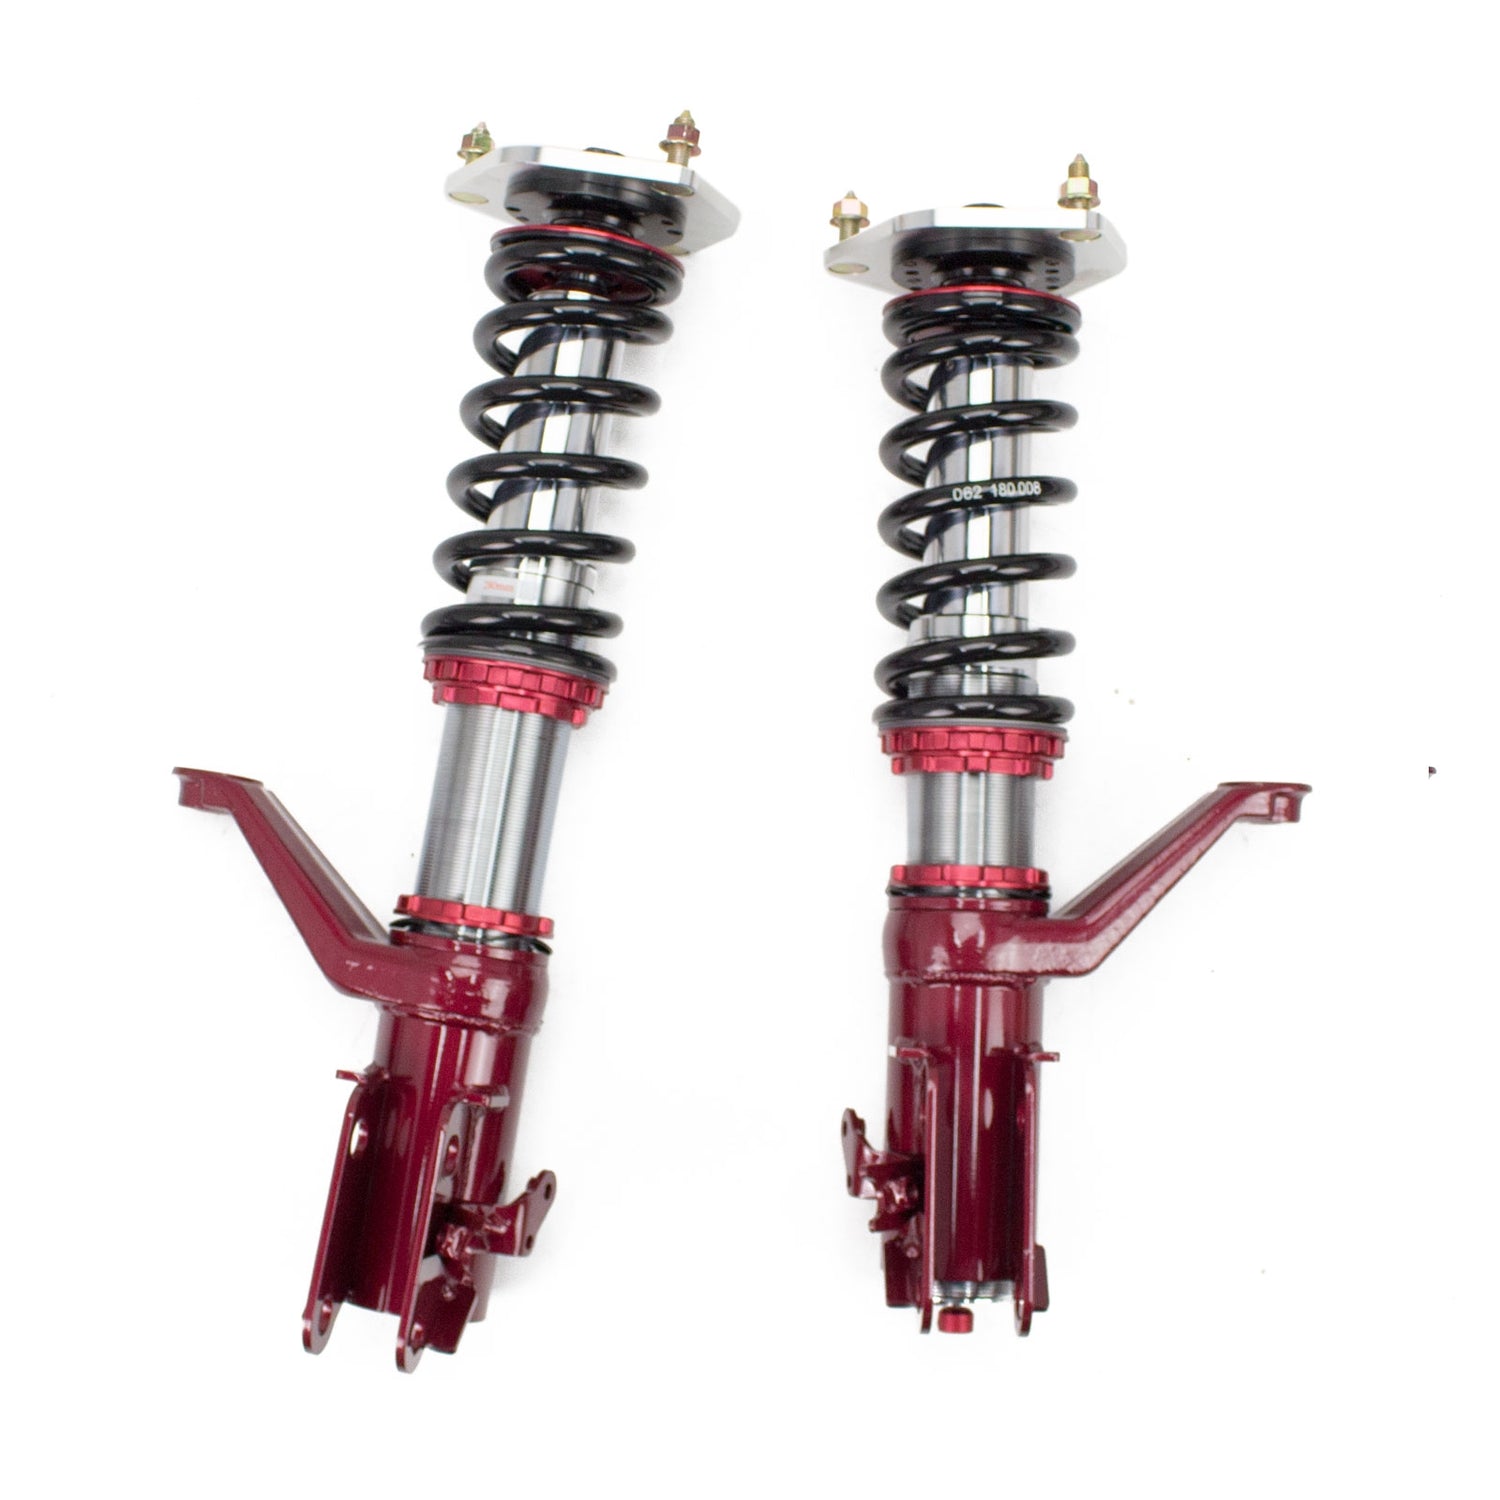 Godspeed(MMXI-7001-A) MAXX SPORTS High Performance Inverted Coilovers Kit, for Aucra RSX (DC5) 2002-06